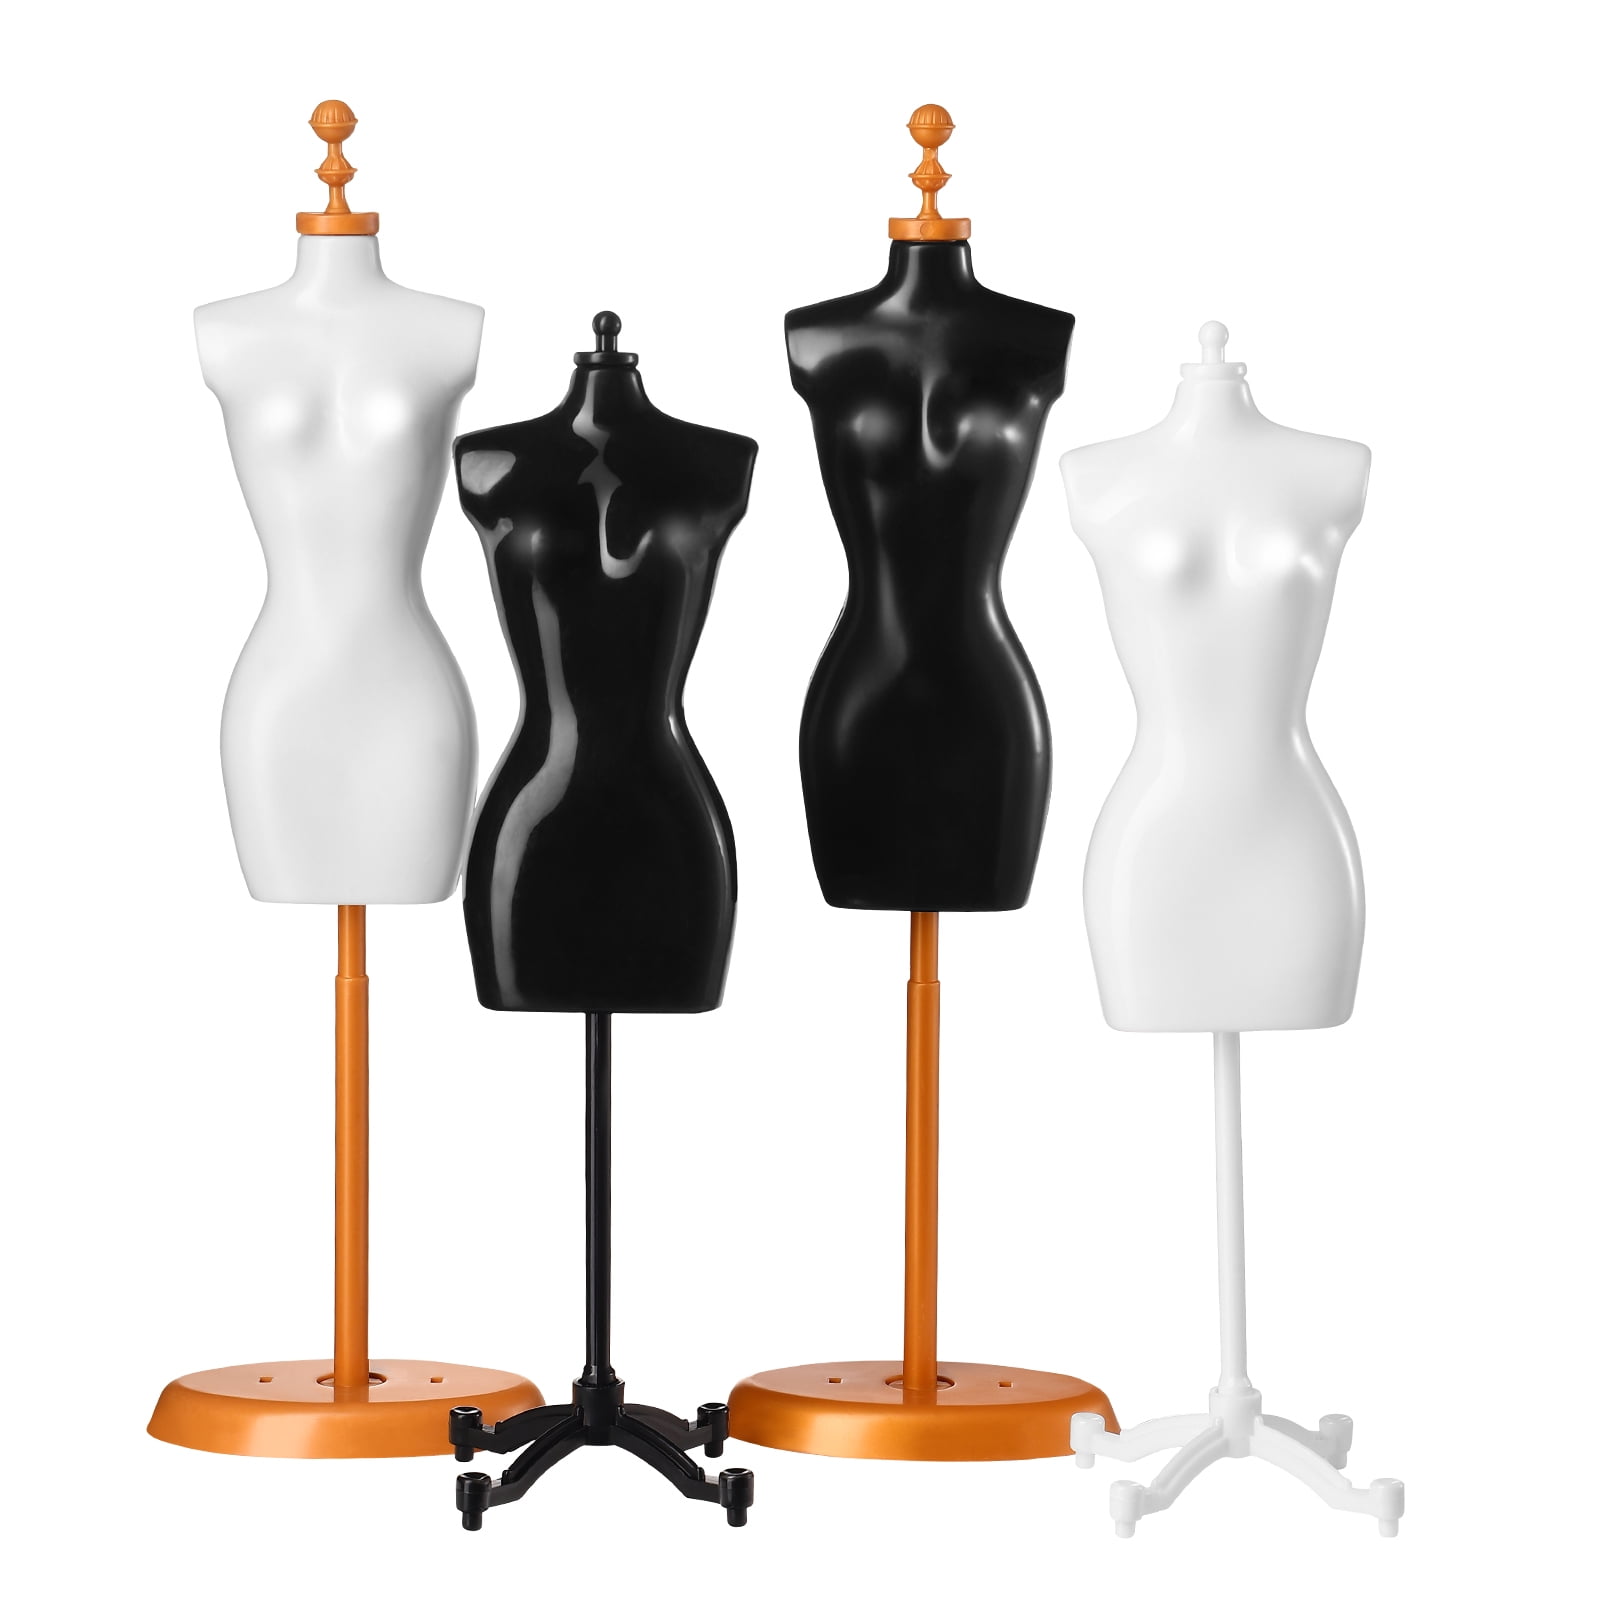 Clothes Dress Gown Outfit Mannequin Model Stand Holder Display for  Doll* 